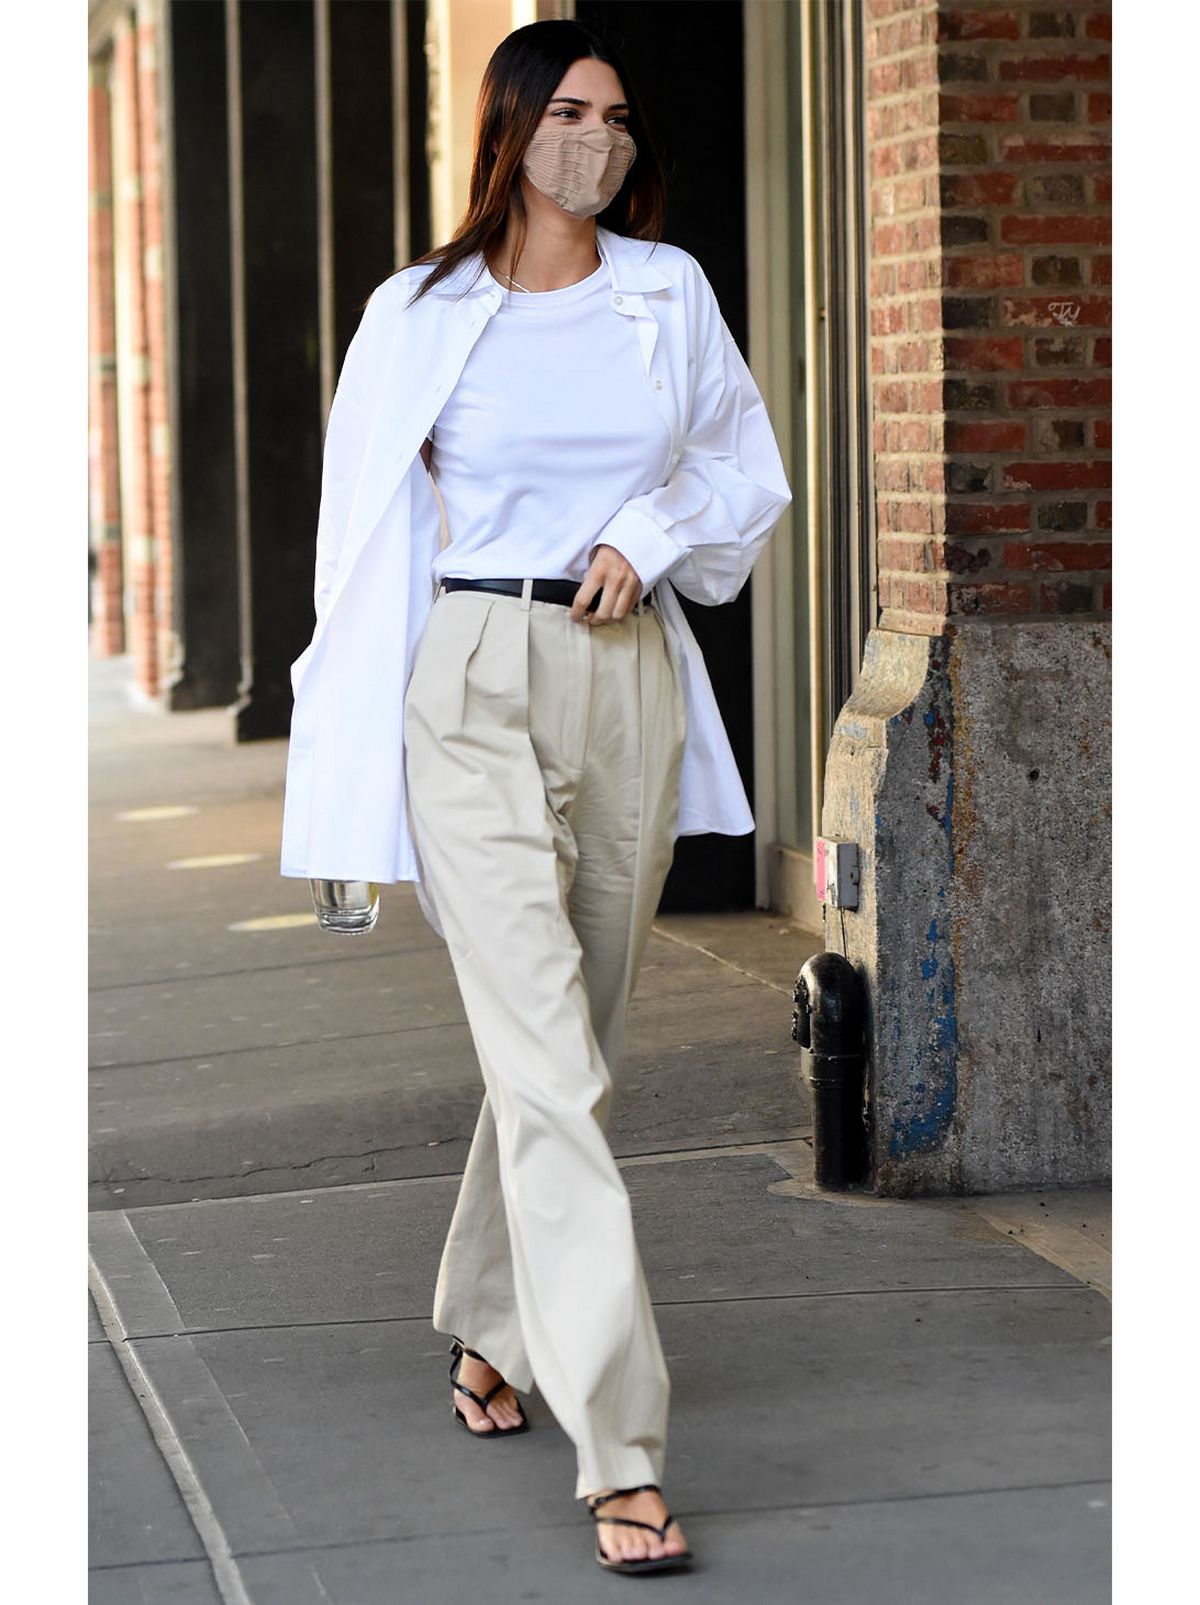 Women's Oversized Clothing Tips and Ideas  Oversized outfit, White shirt  outfits, Oversized shirt outfit